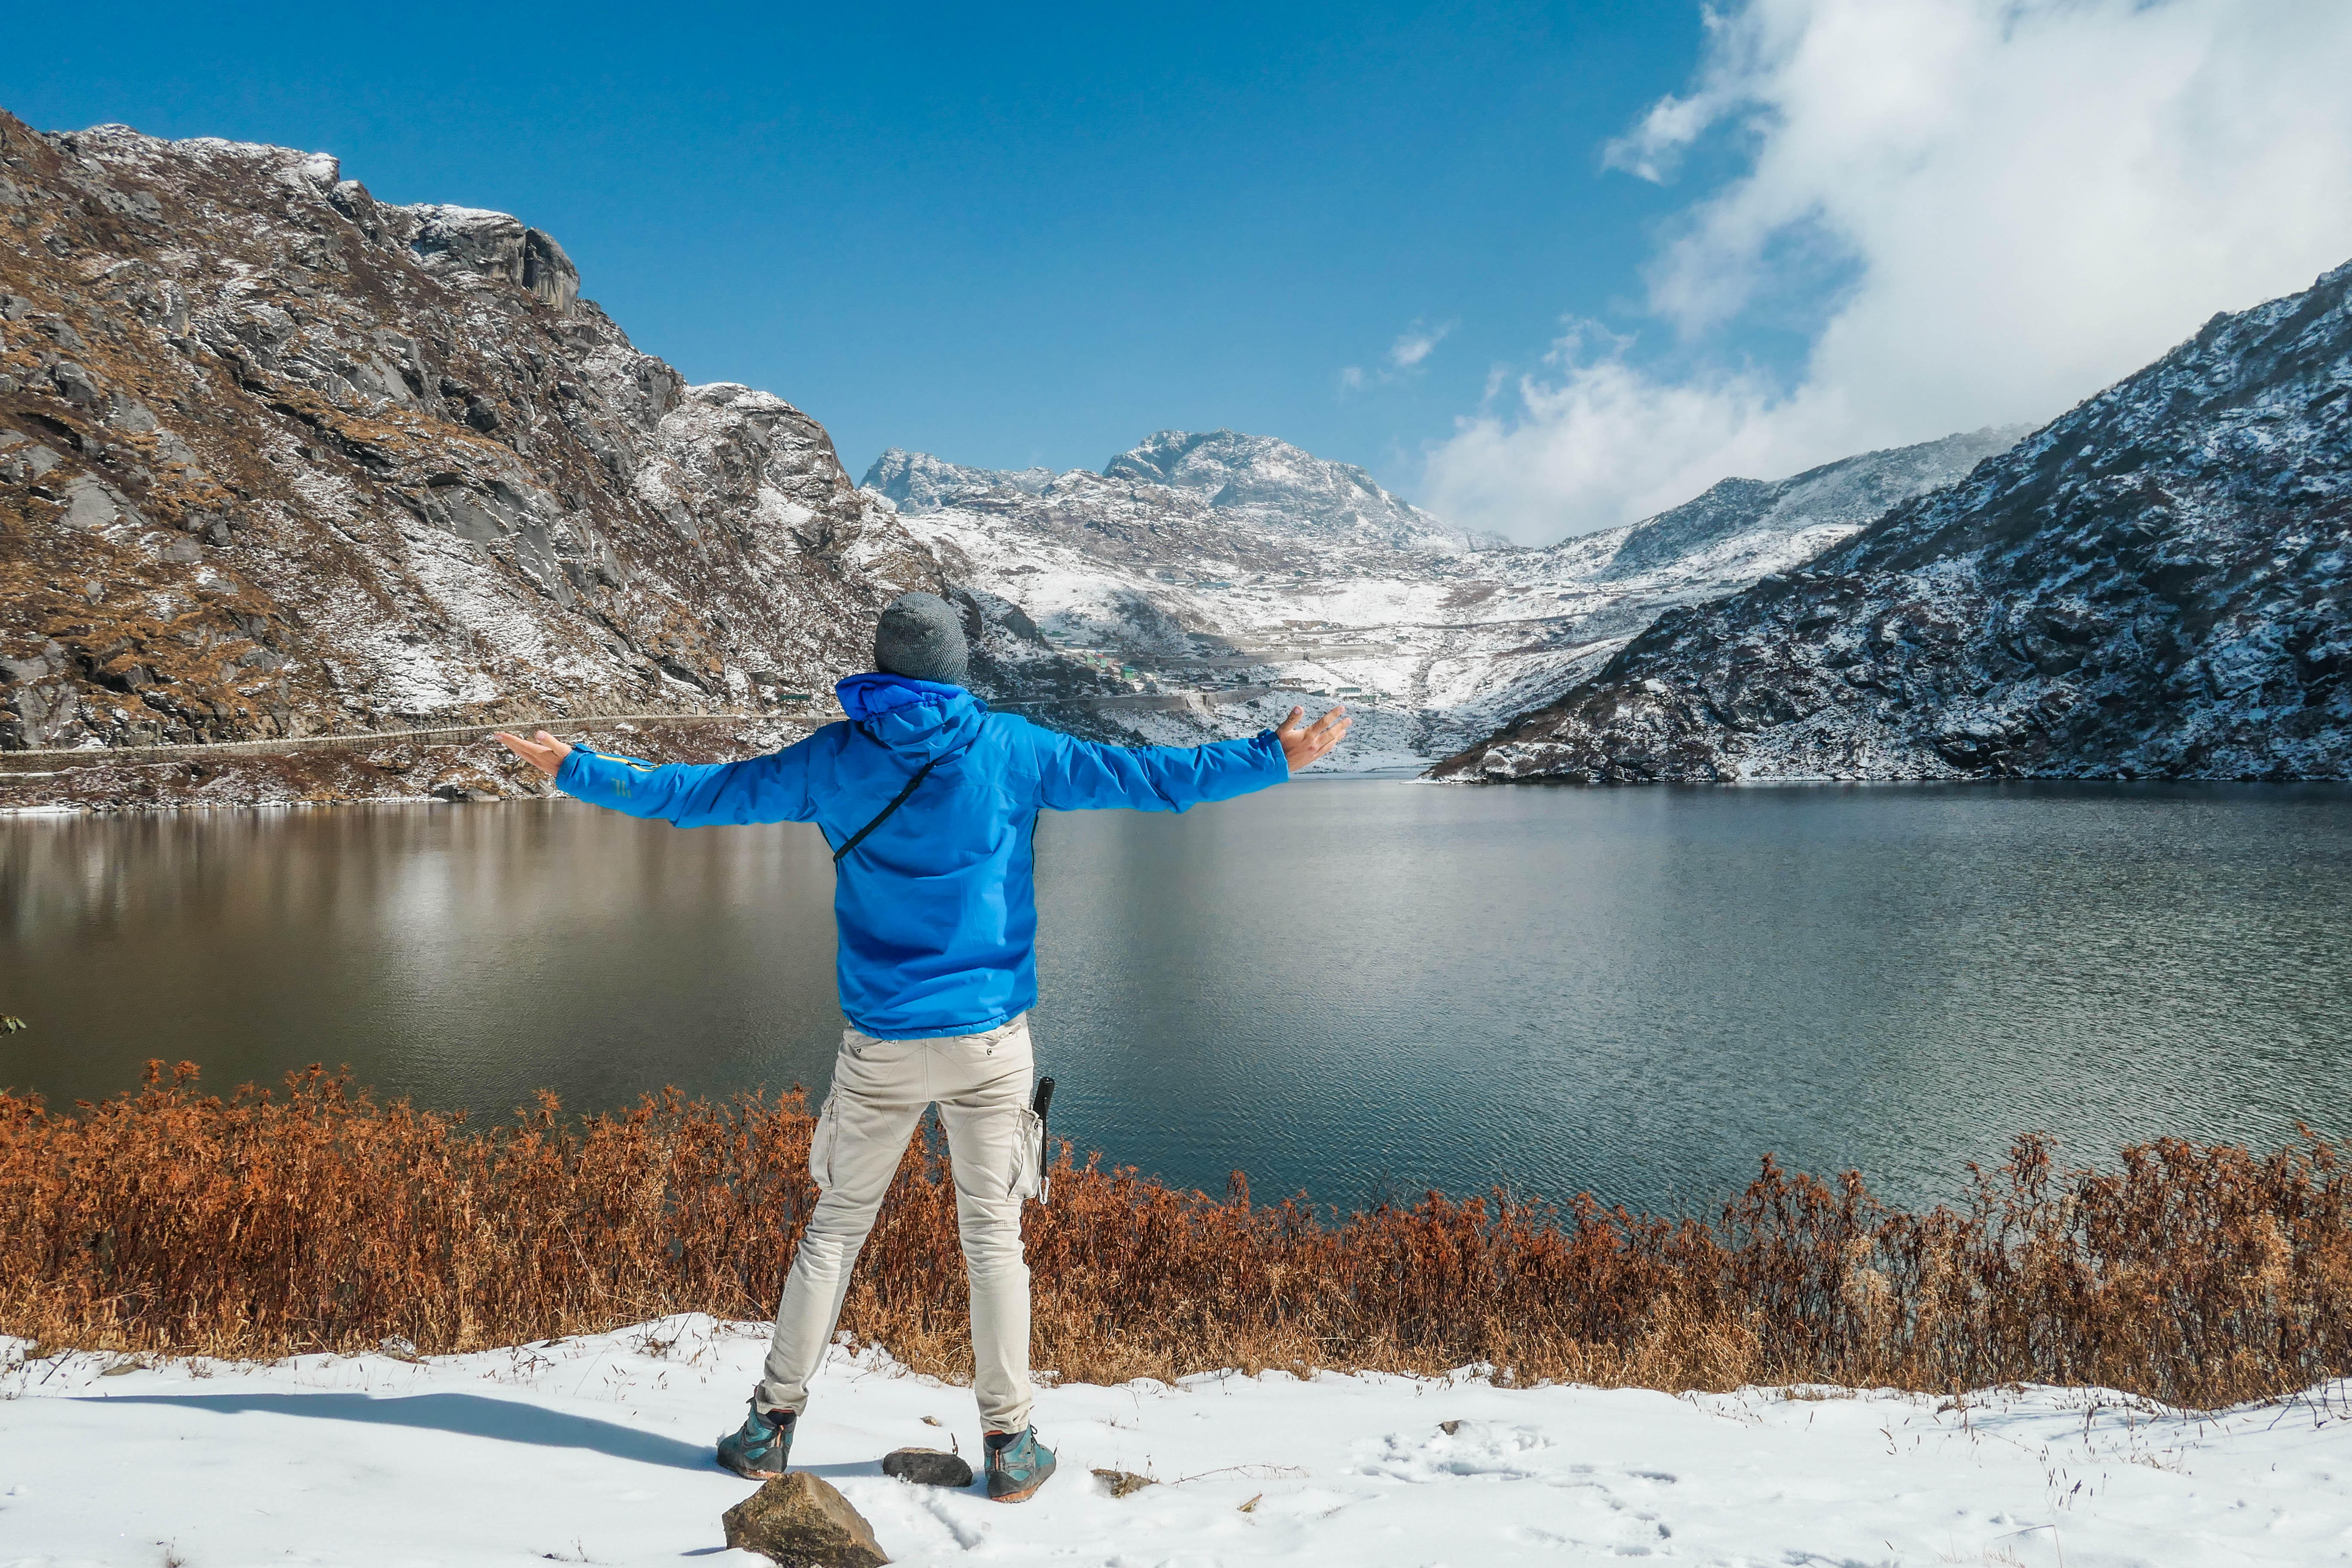 Marvel at the stunning beauty of Tsomgo Lake, surrounded by snow-capped peaks